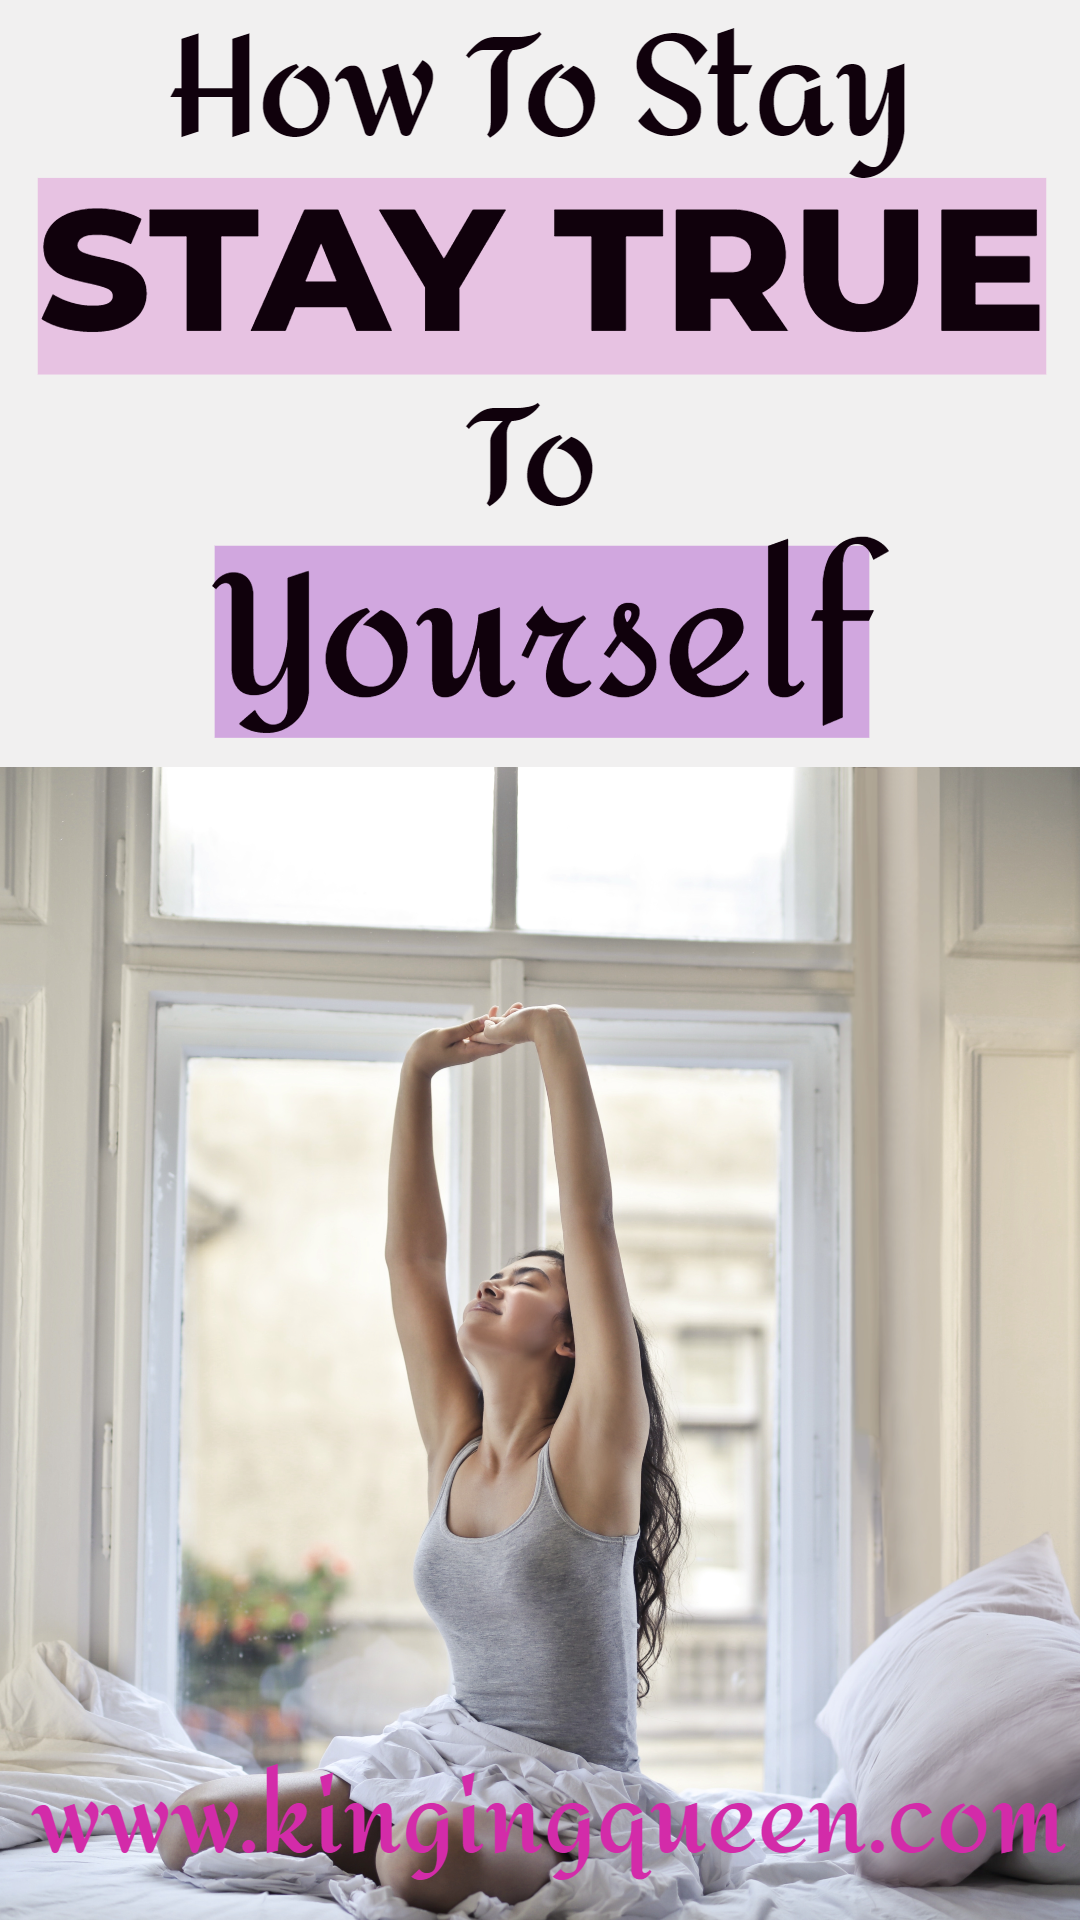 How To Stay True To Yourself